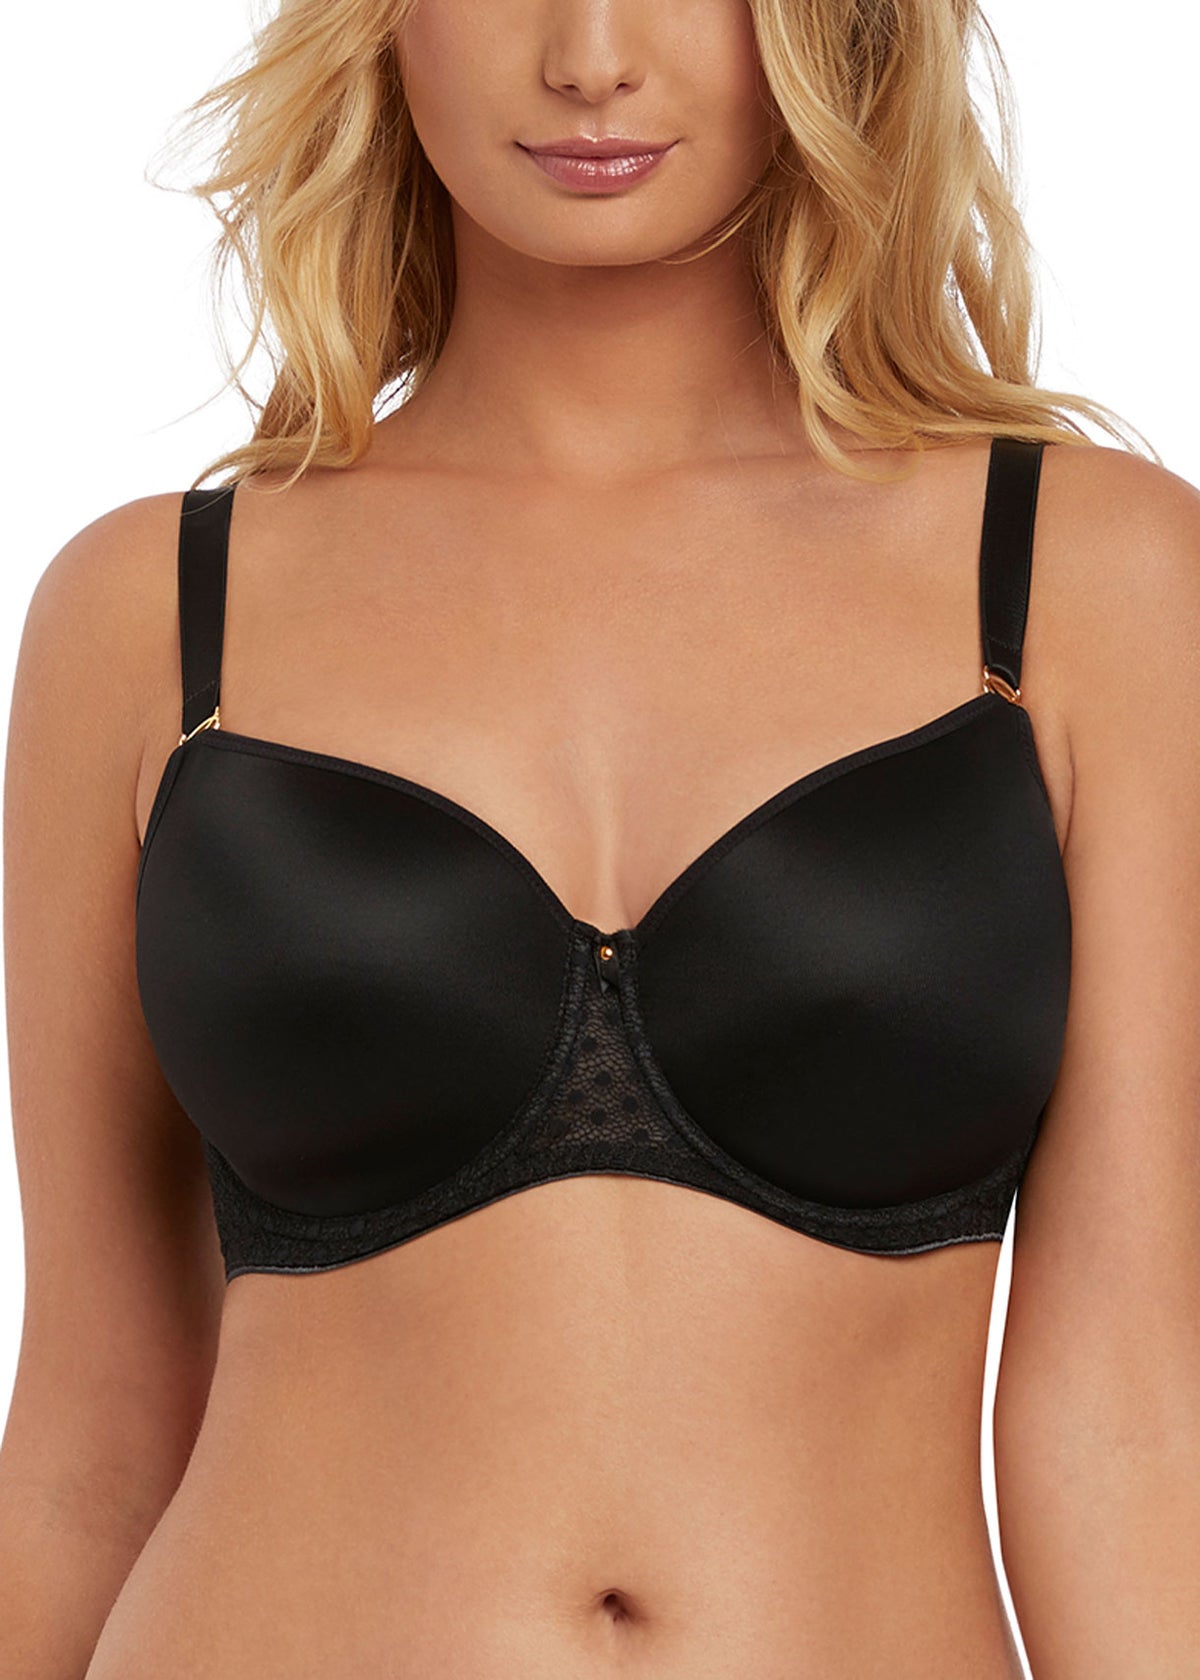 Starlight Moulded Bra - Black, worn by model front view